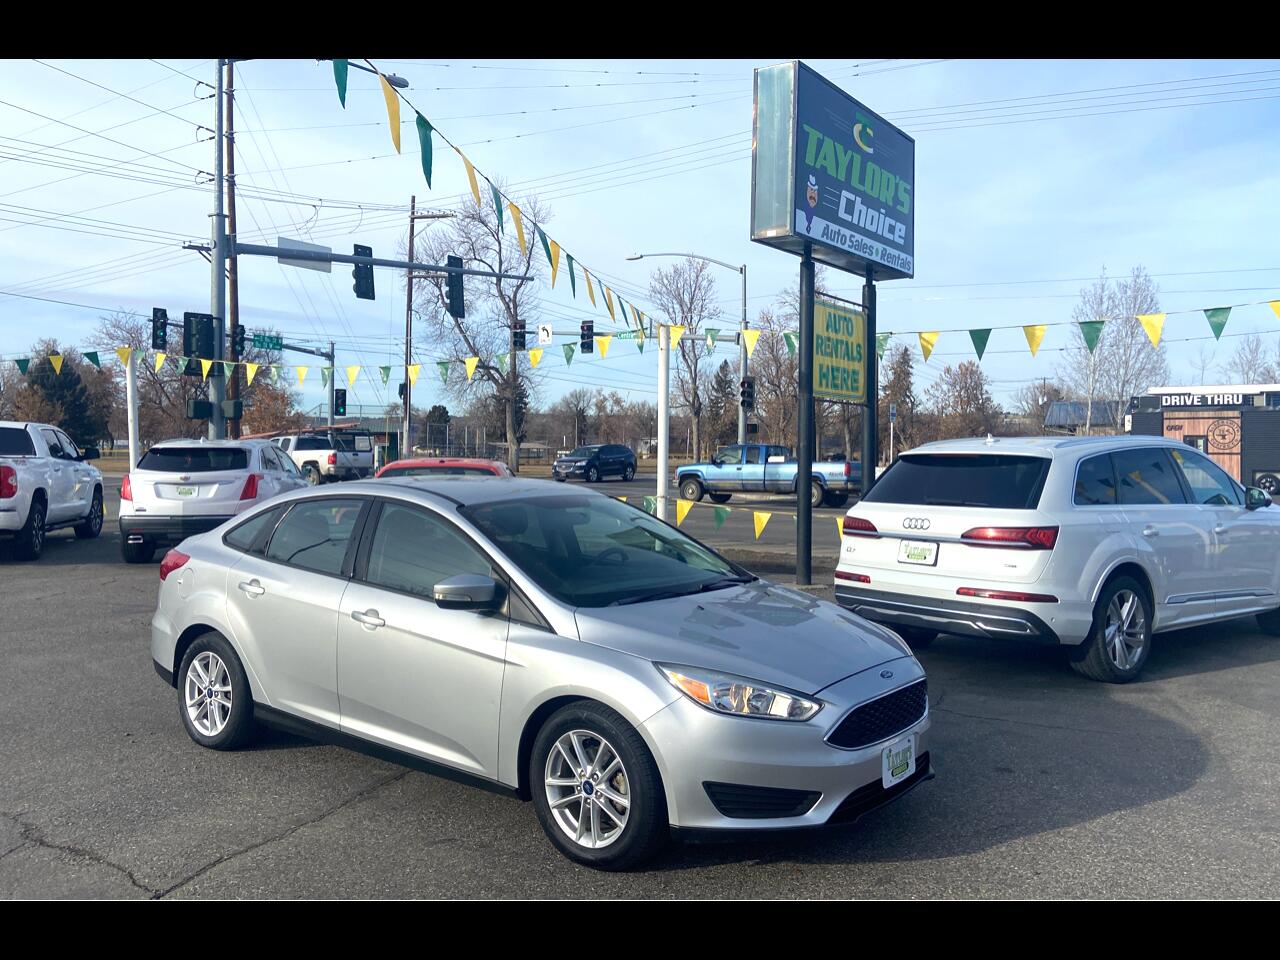 2016 Ford Focus – More to Love!